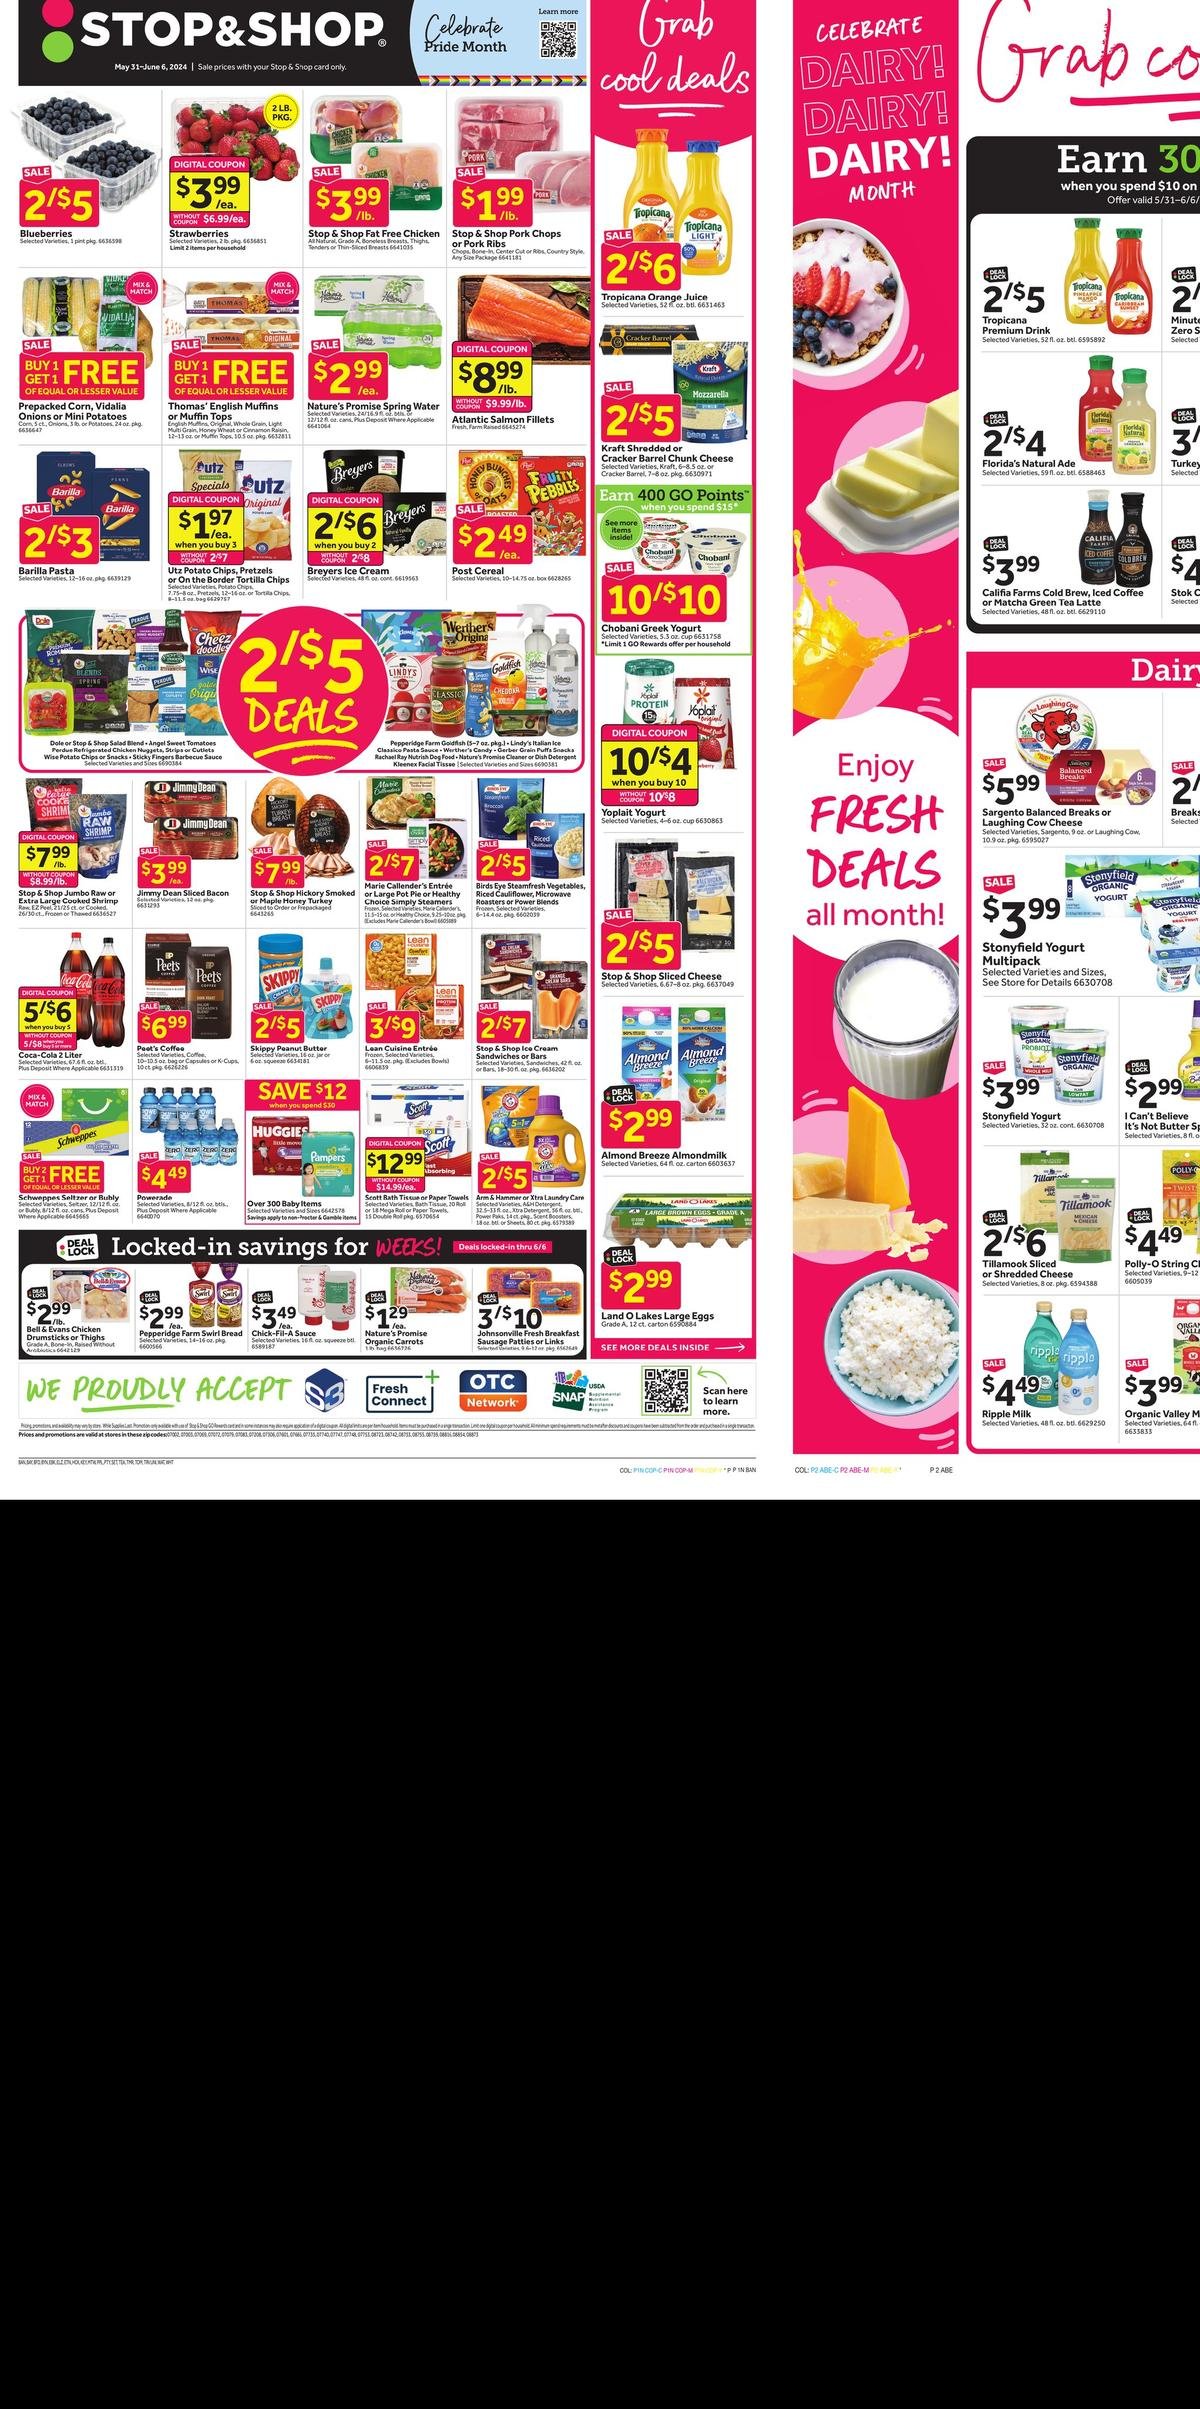 Stop & Shop weekly ad - page 1